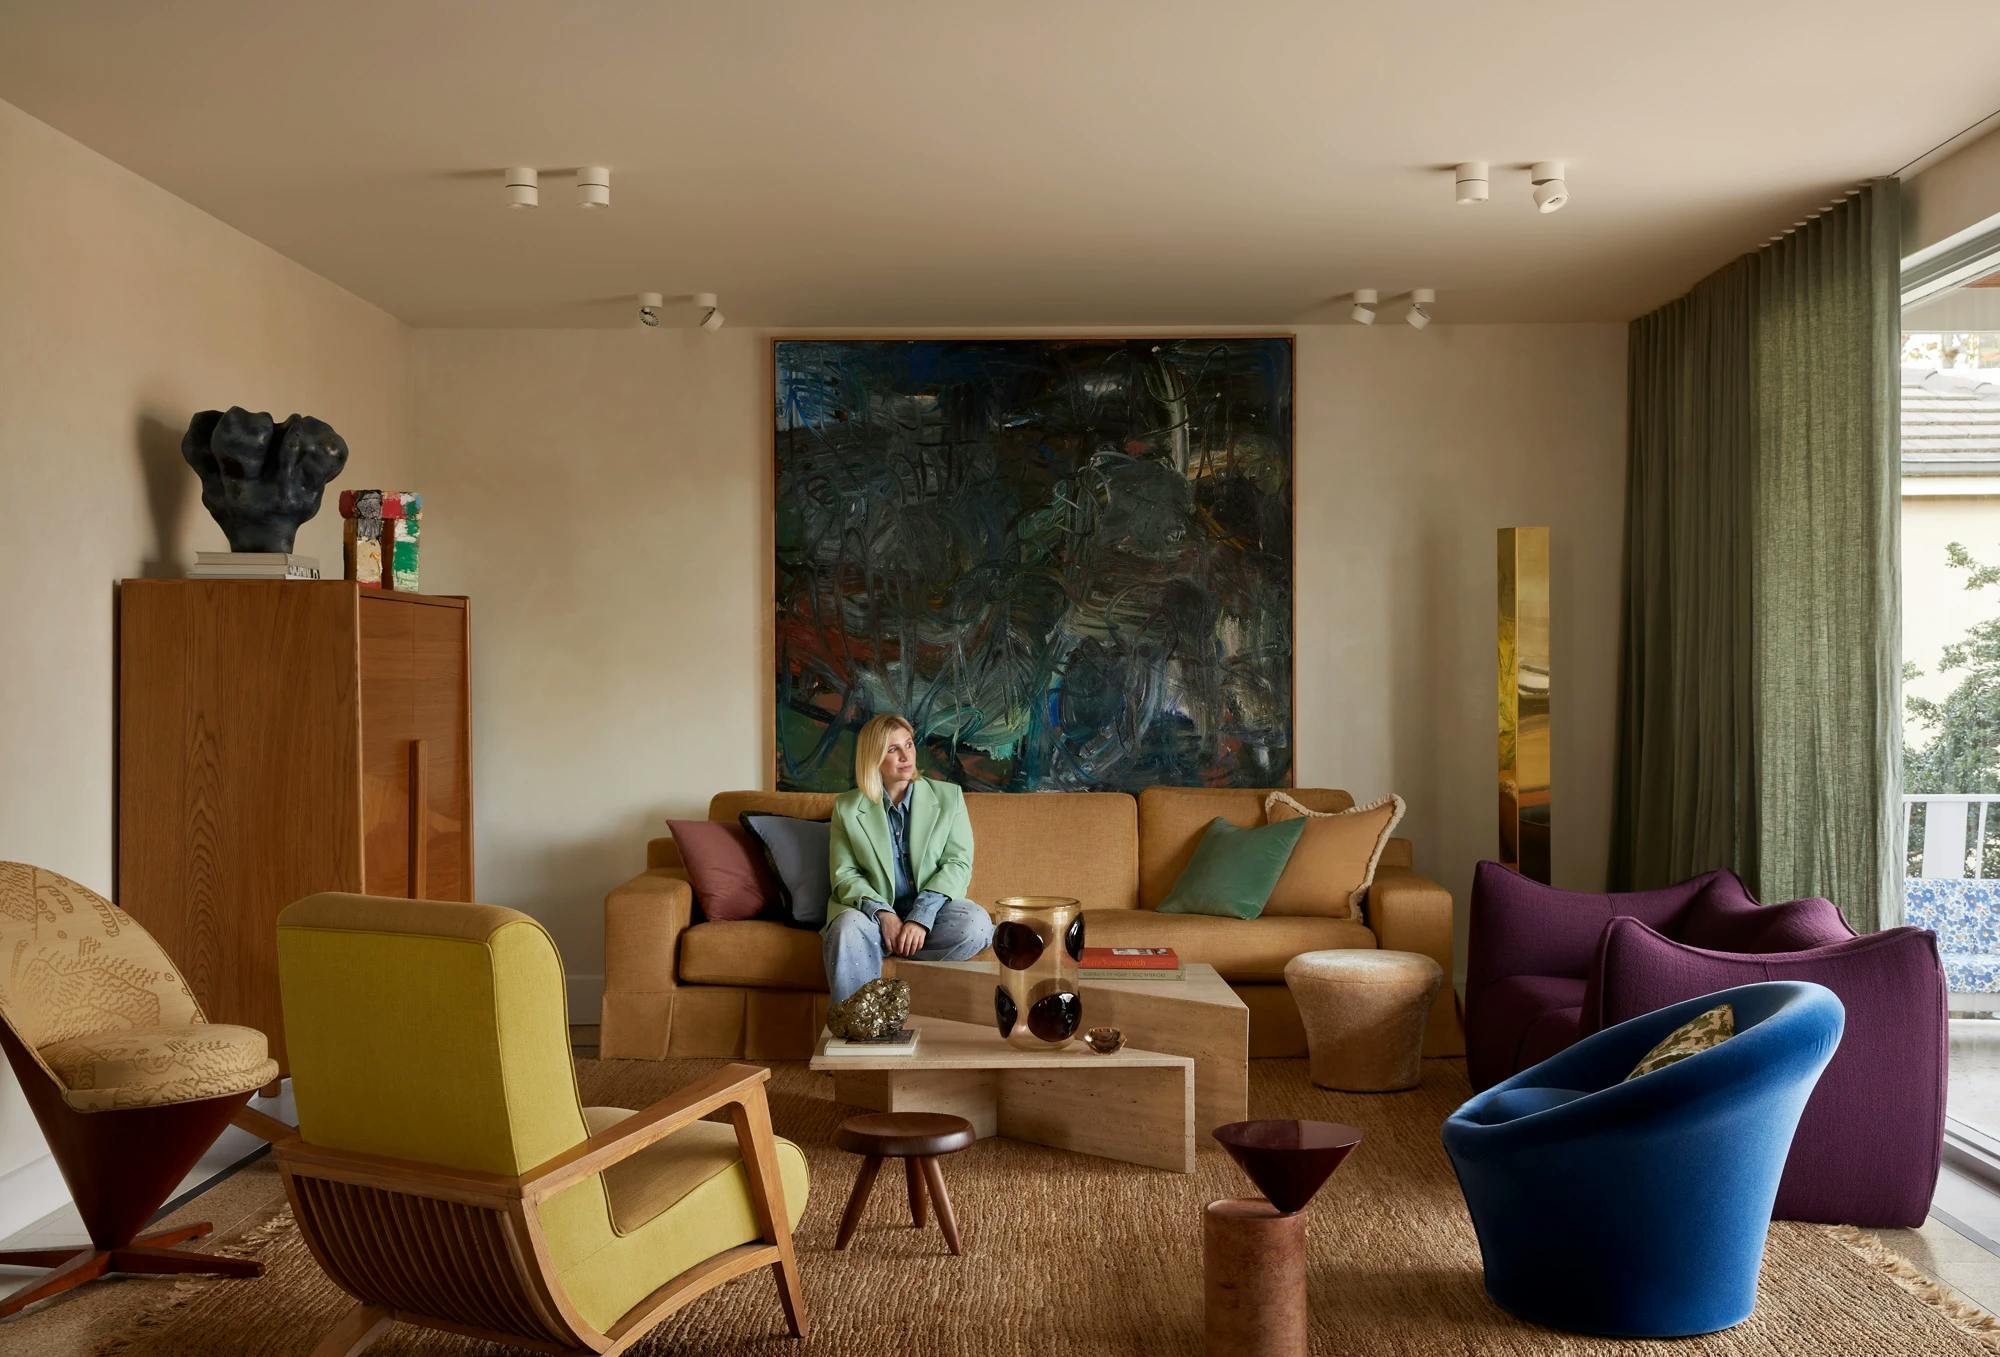 Designer Tali Roth sitting on a brown couch below a large abstract painting within a living room with colorful chairs.